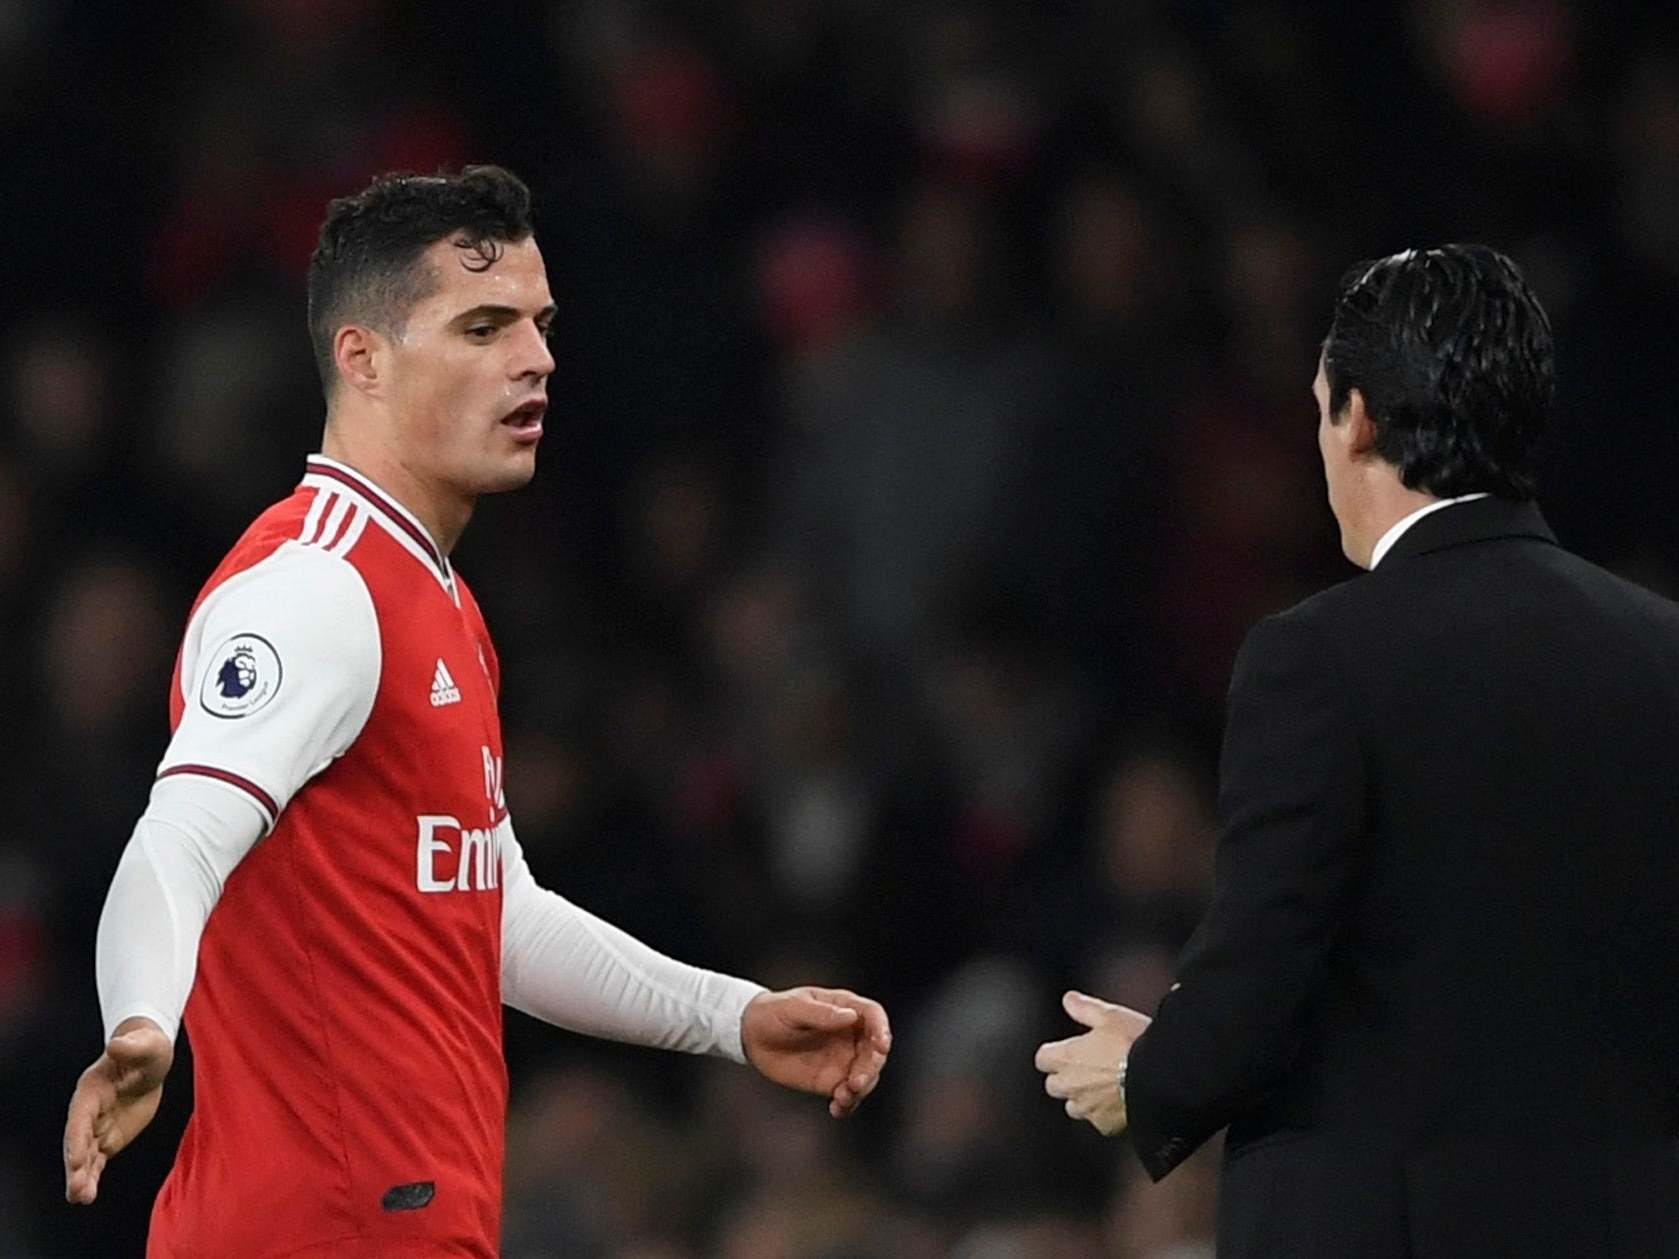 Xhaka is booed after being taken off